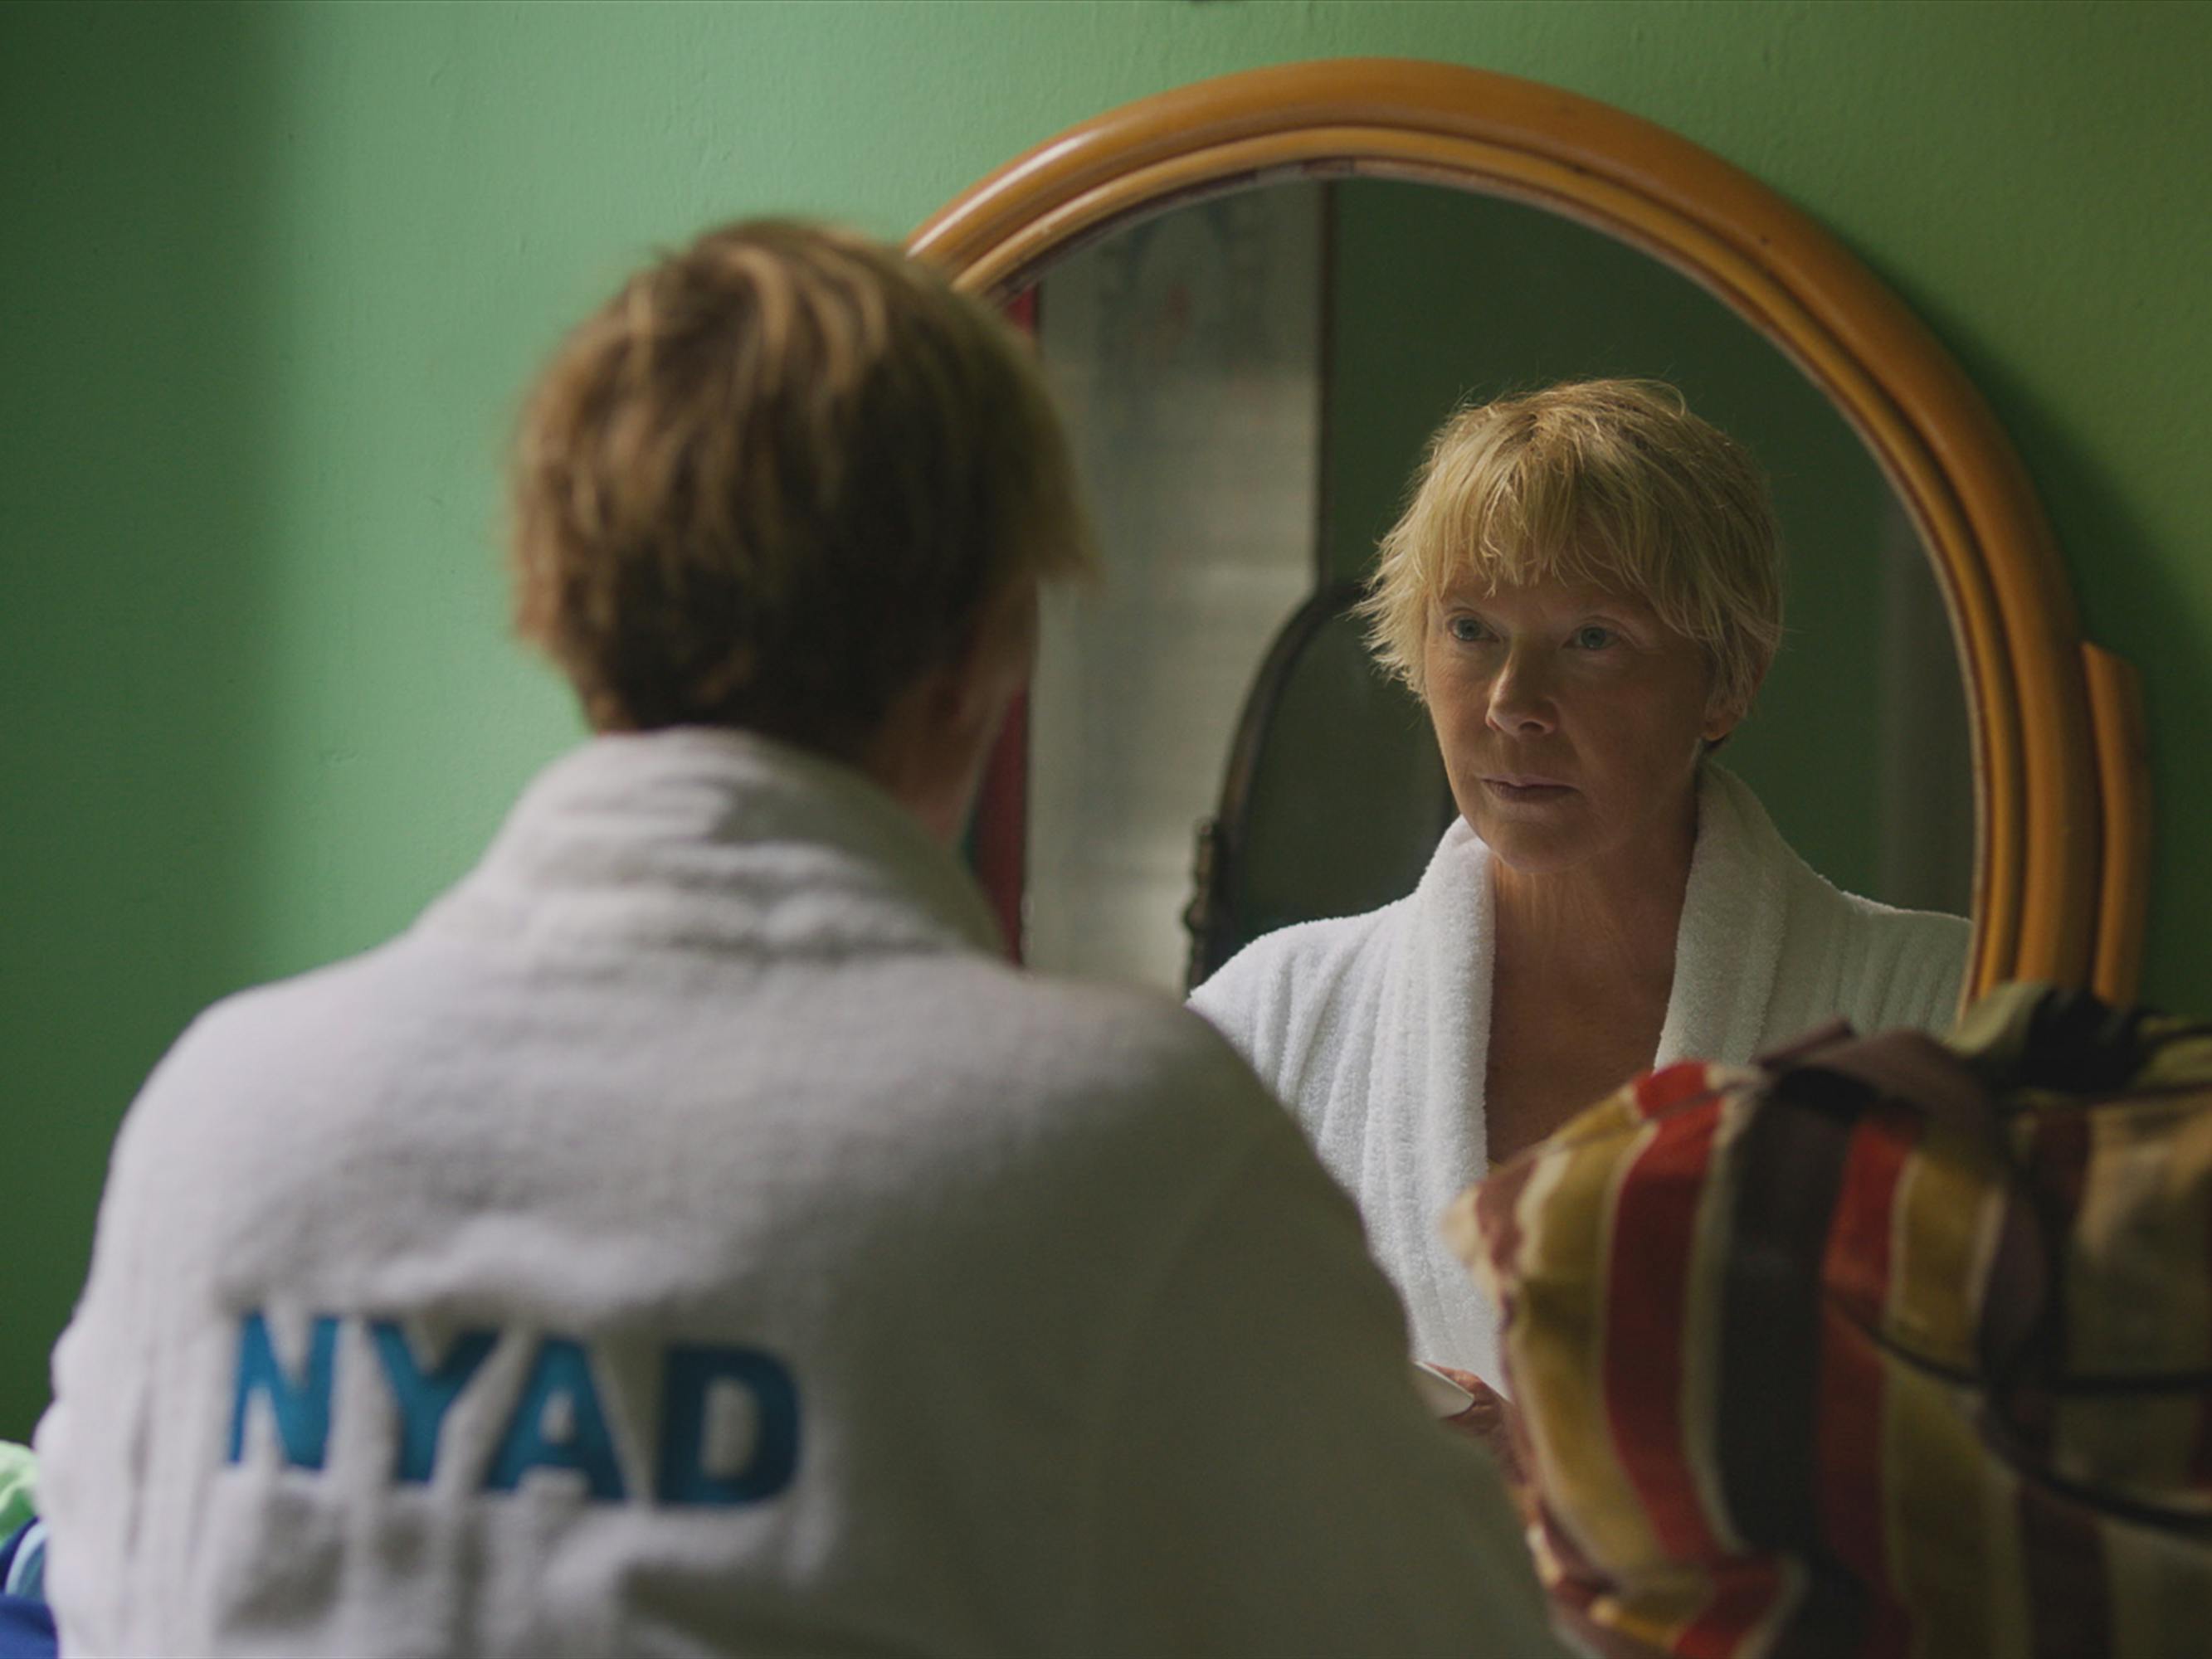 Diana Nyad (Annette Bening) wears a white robe with NYAD in blue writing on the back and looks into the mirror.